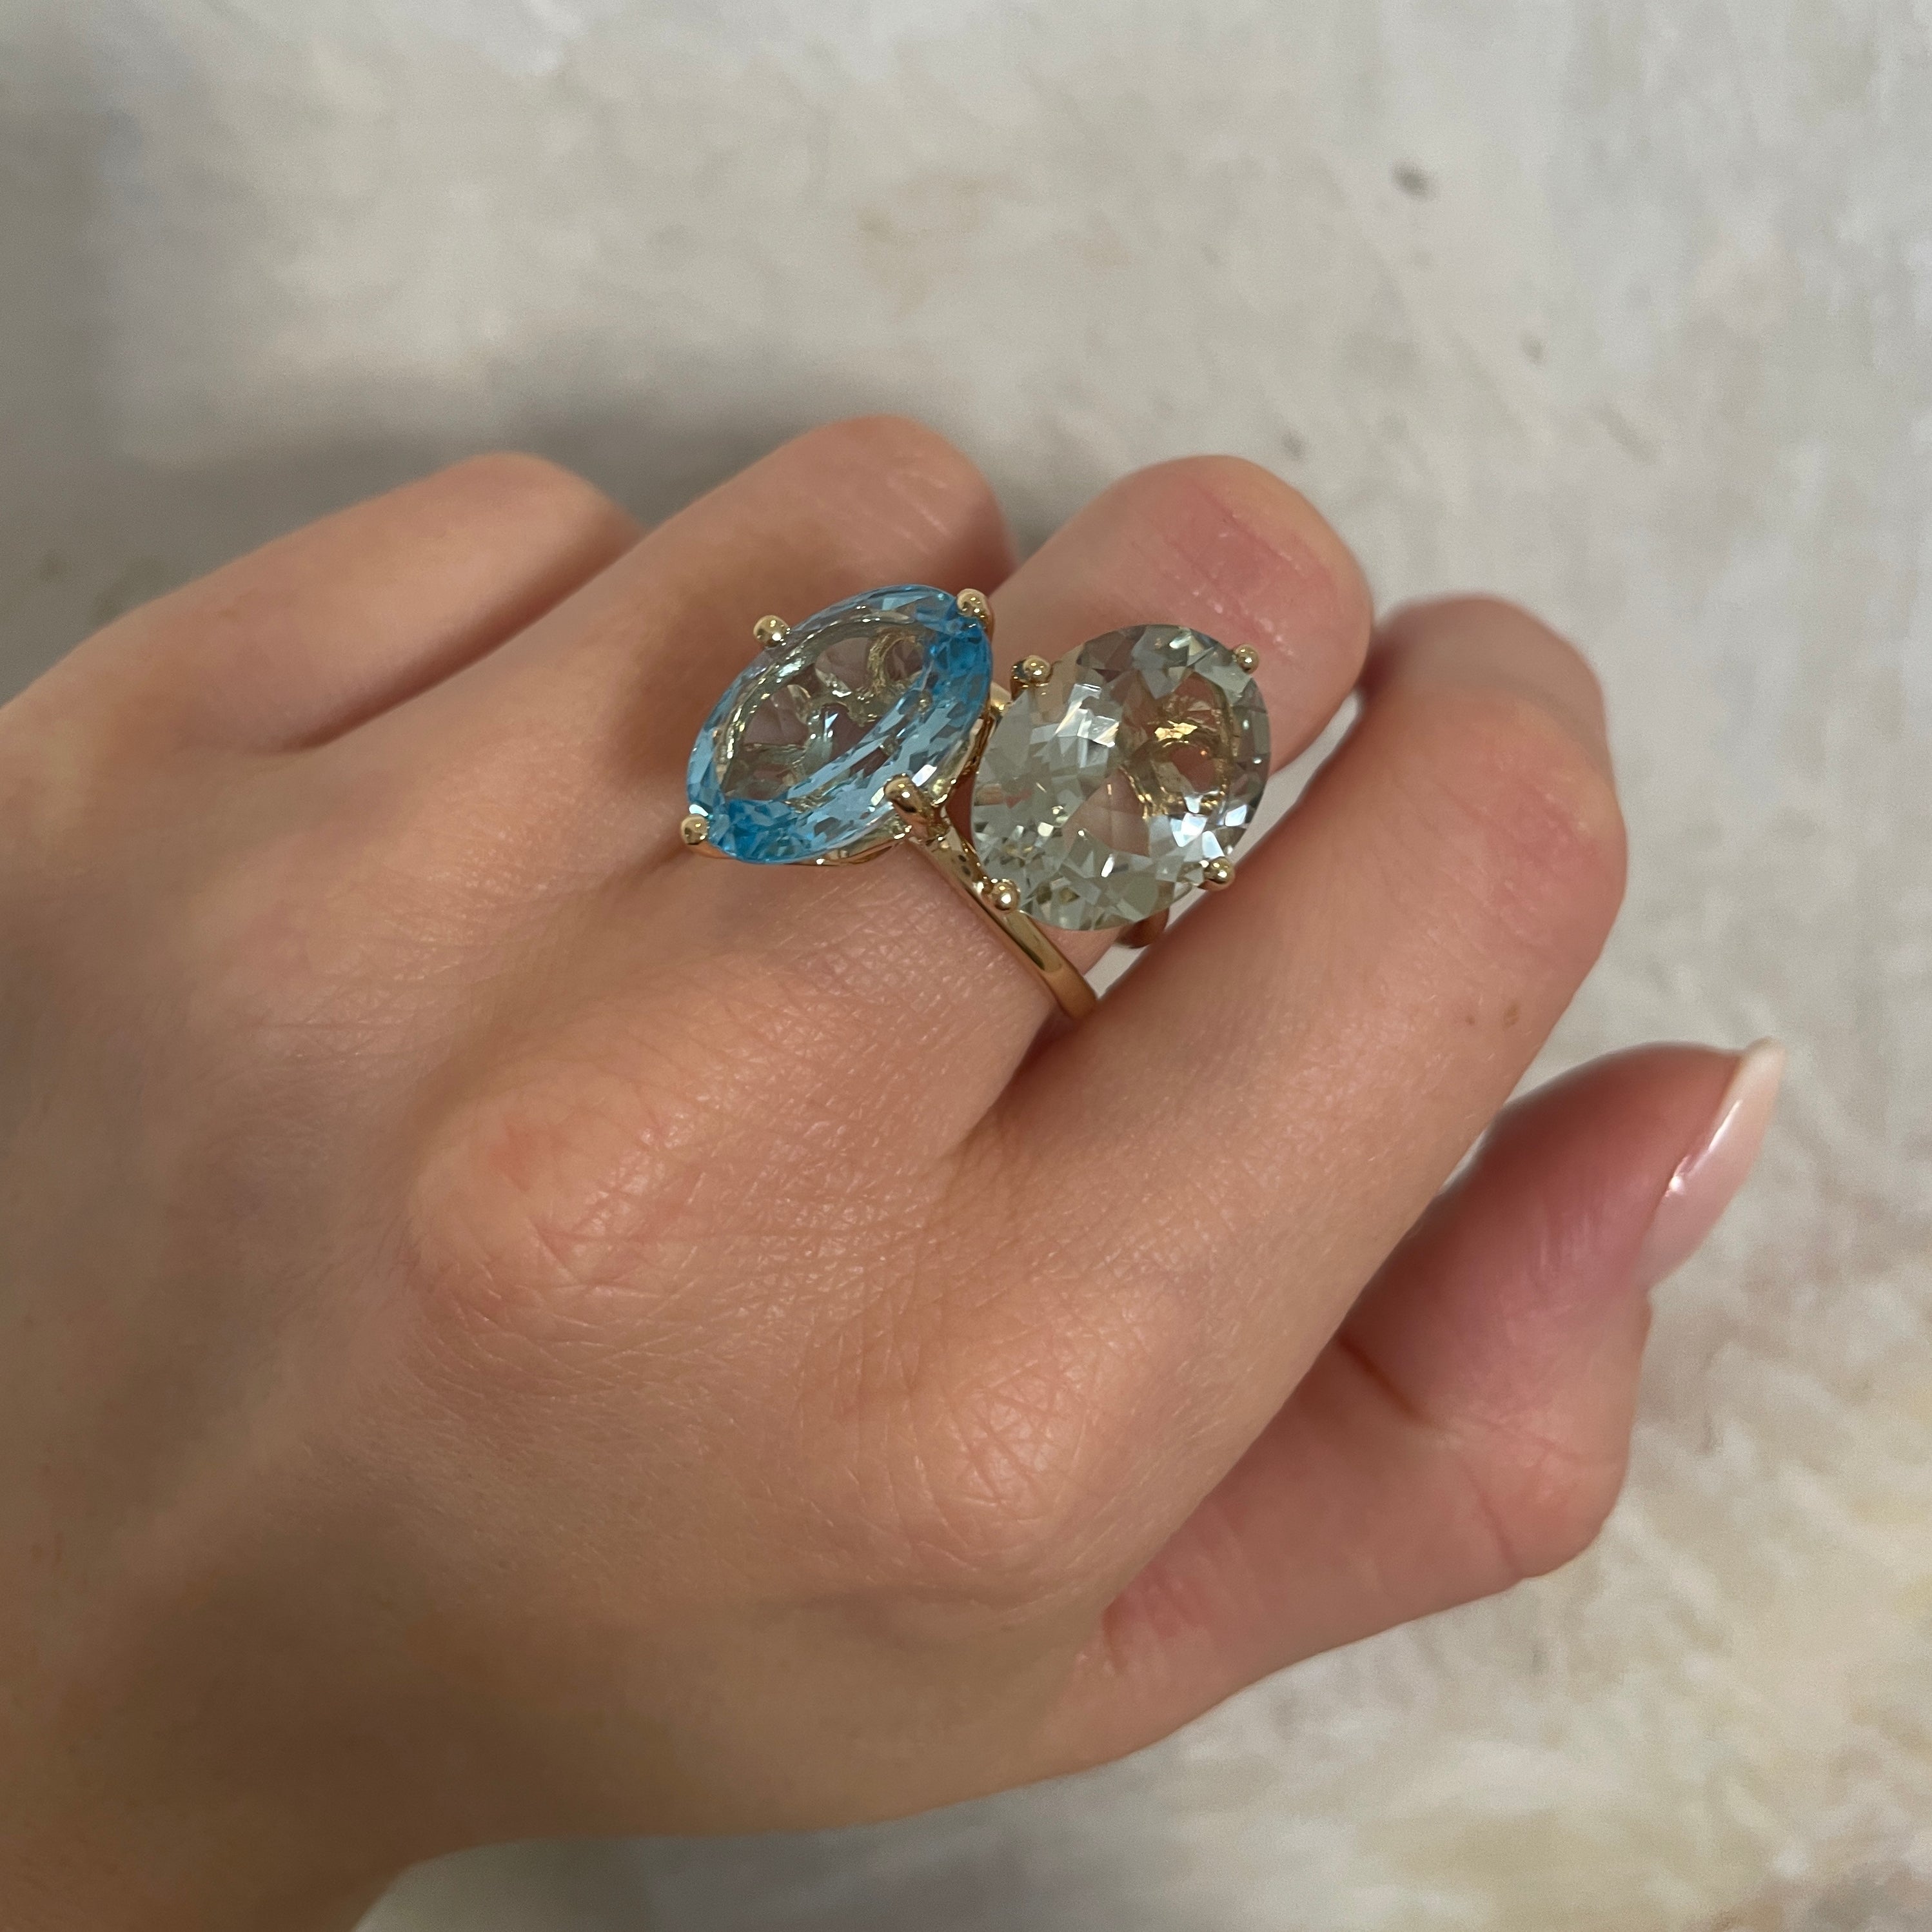 Stunning oval gemstone rings that make a statement! International shipping and customization available.